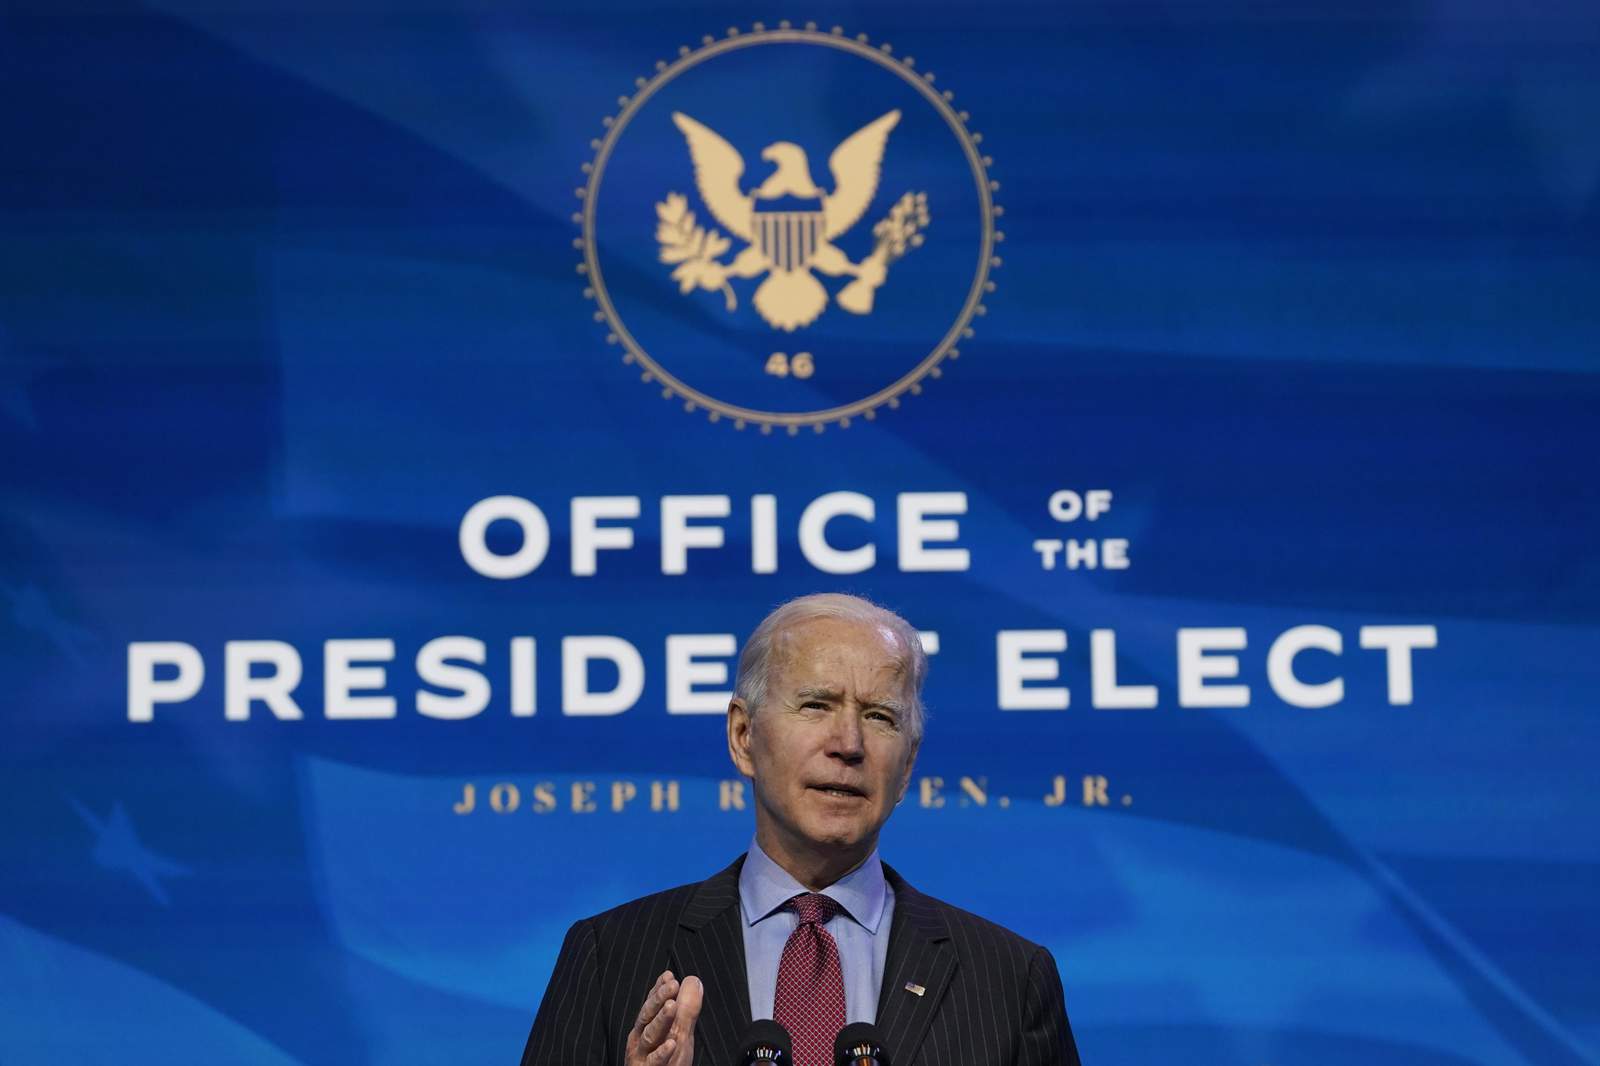 Impeachment complicates the early days of Biden's presidency